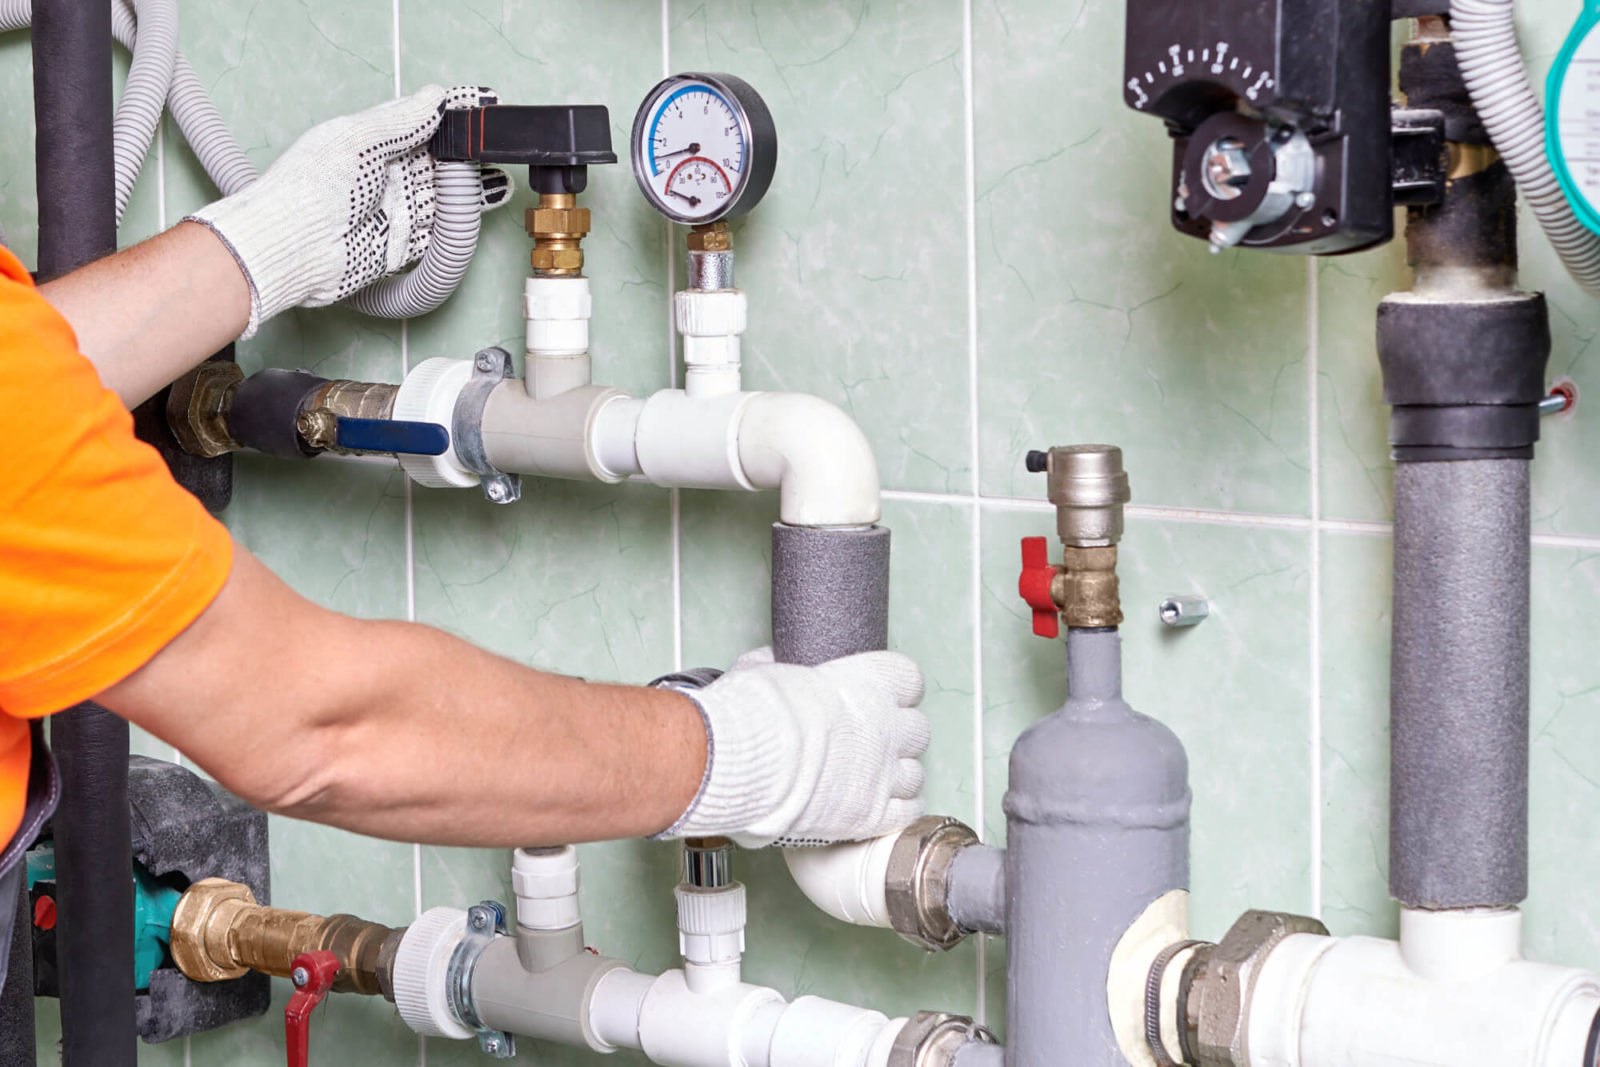 What is the difference between being a plumber in people’s homes and a commercial plumber?